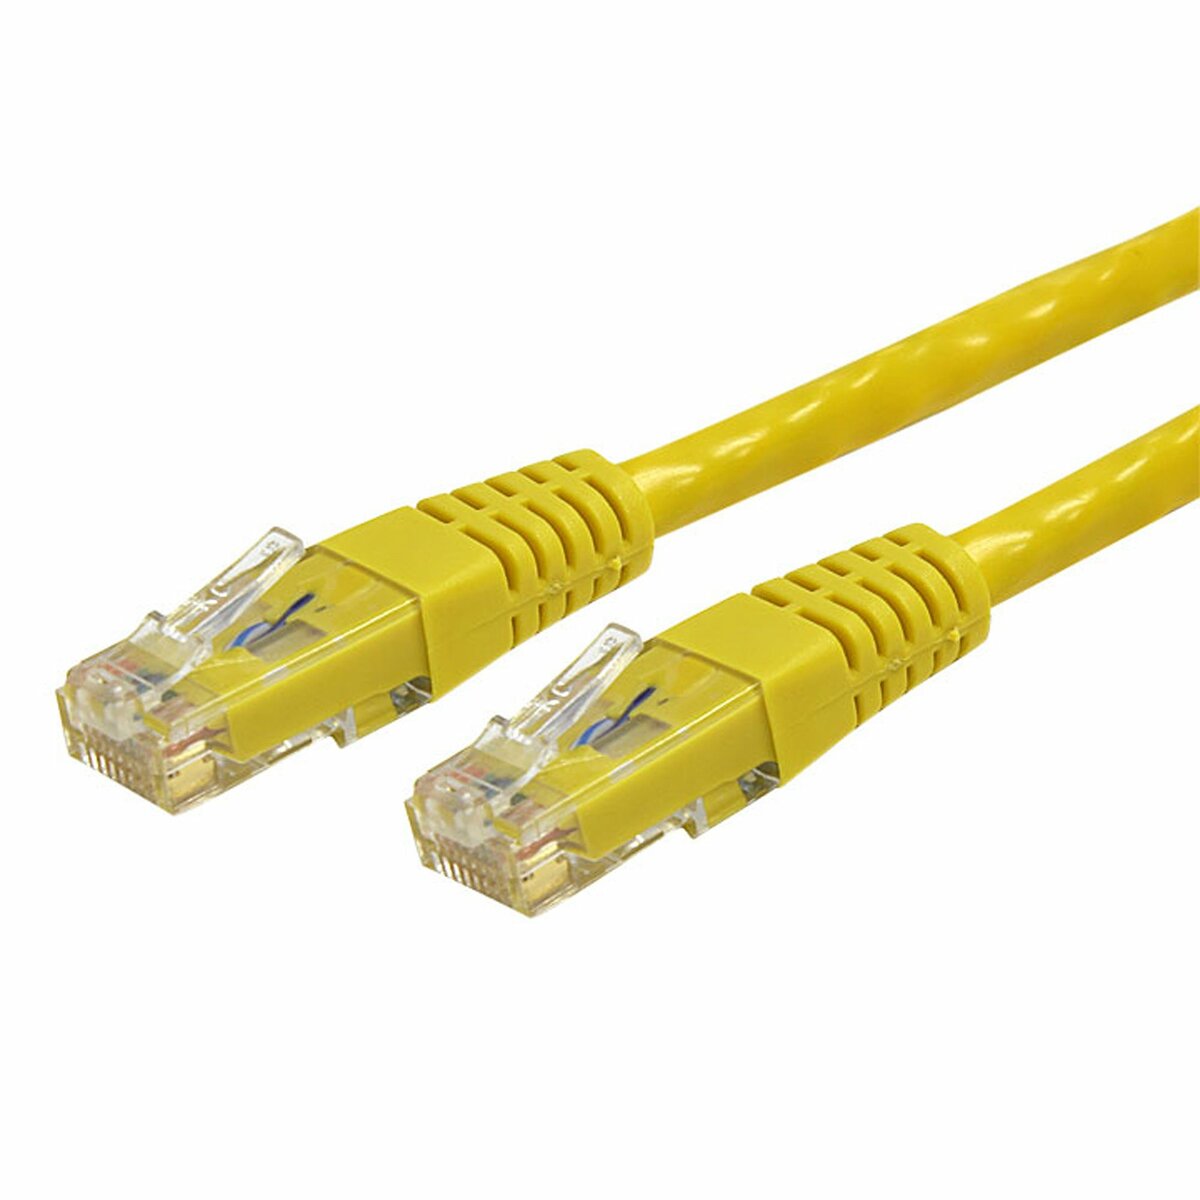 StarTech.com 1ft CAT6 Ethernet Cable - 10 Gigabit Molded RJ45 650MHz 100W  PoE Patch Cord - CAT 6 10GbE UTP Network Cable with Strain Relief - Blue -  Fluke Tested/Wiring is UL